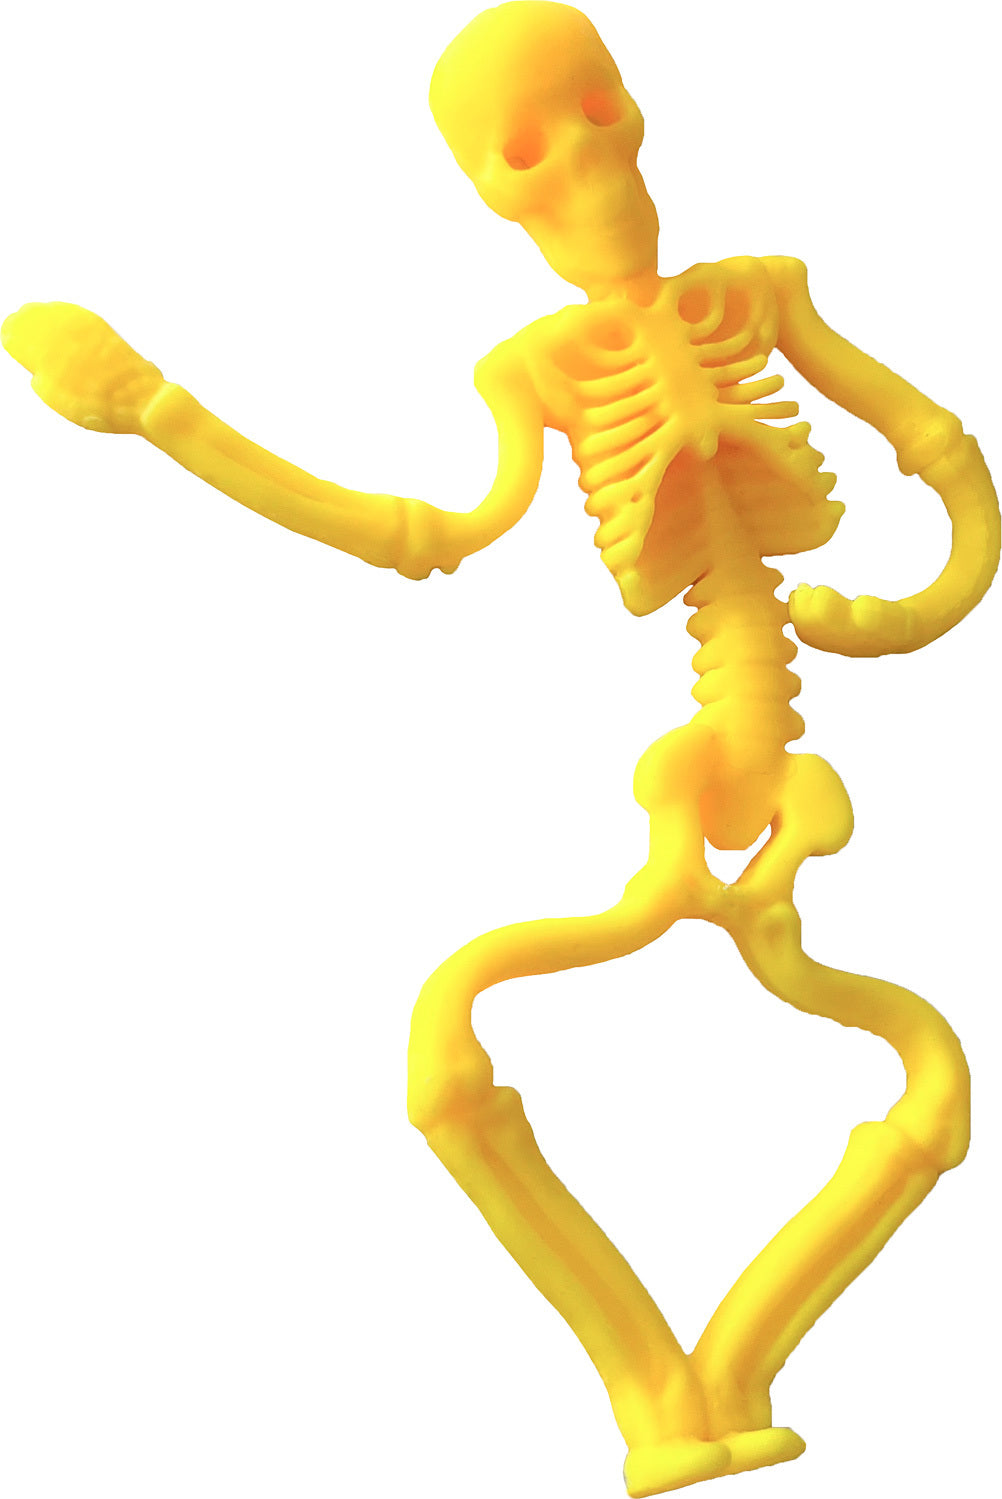 Squish n' Stretch Skeleton (assorted colors)